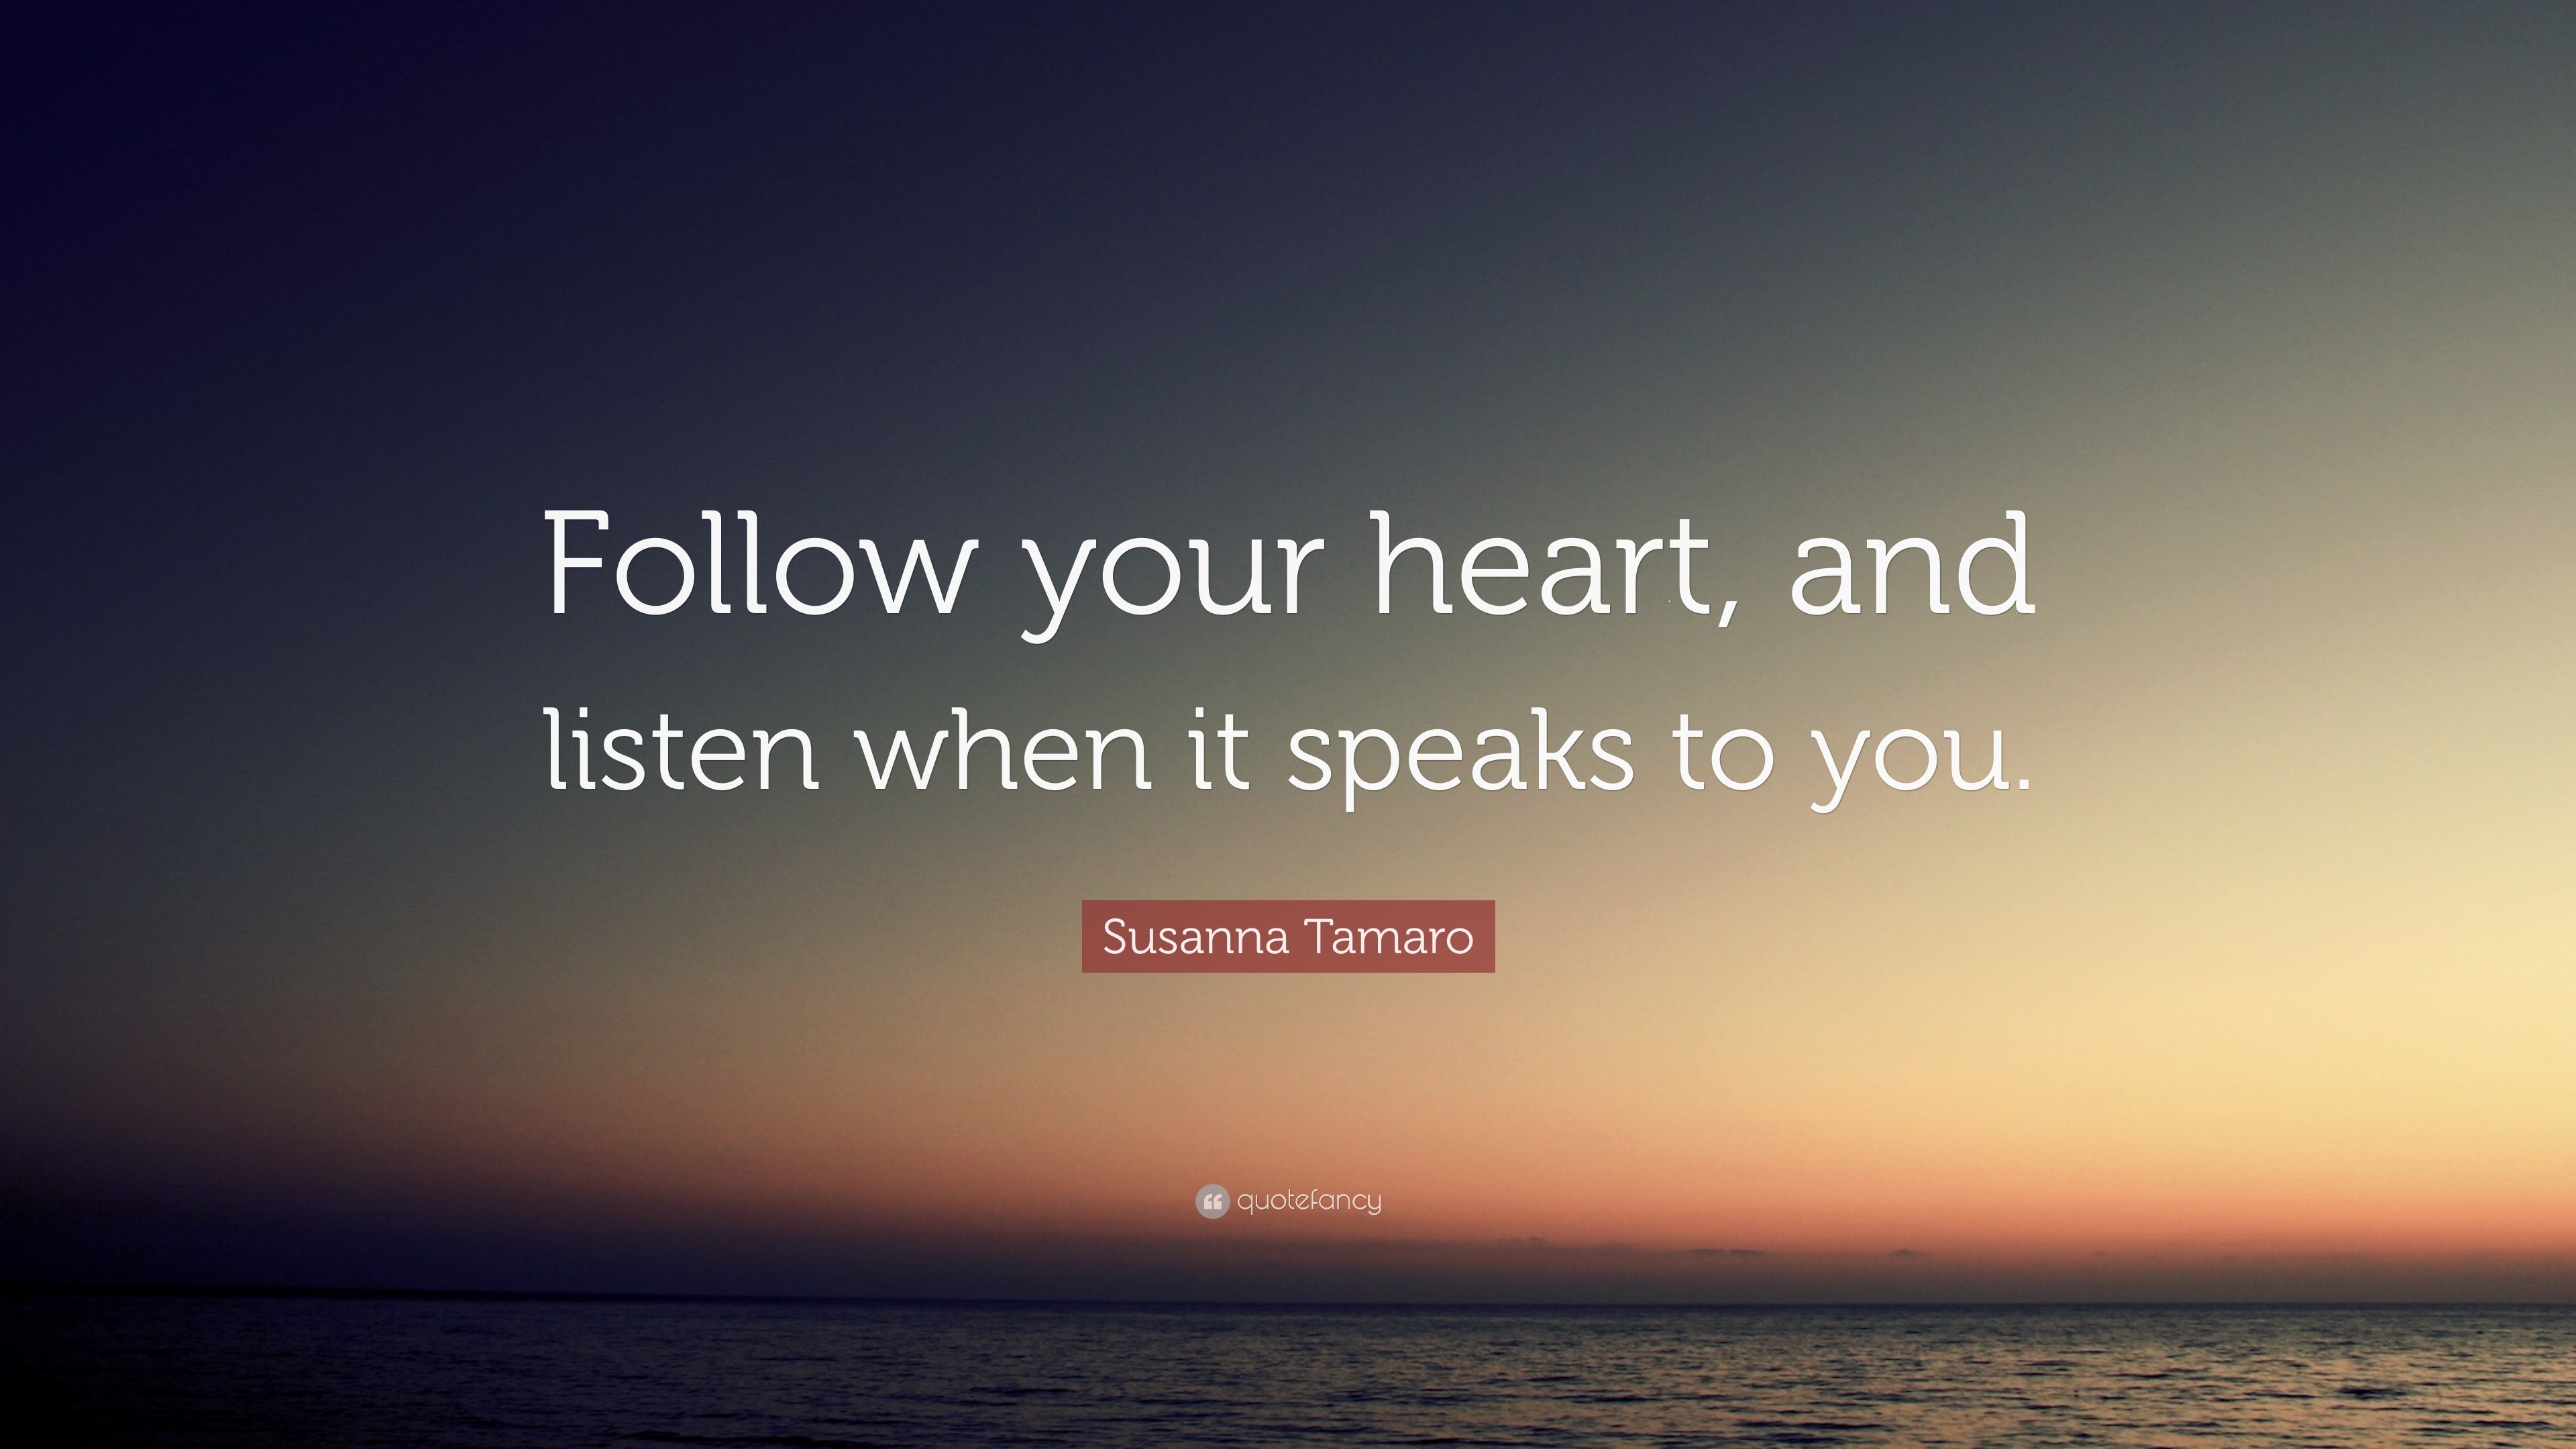 Susanna Tamaro Quote Follow Your Heart And Listen When It Speaks To You 10 Wallpapers Quotefancy